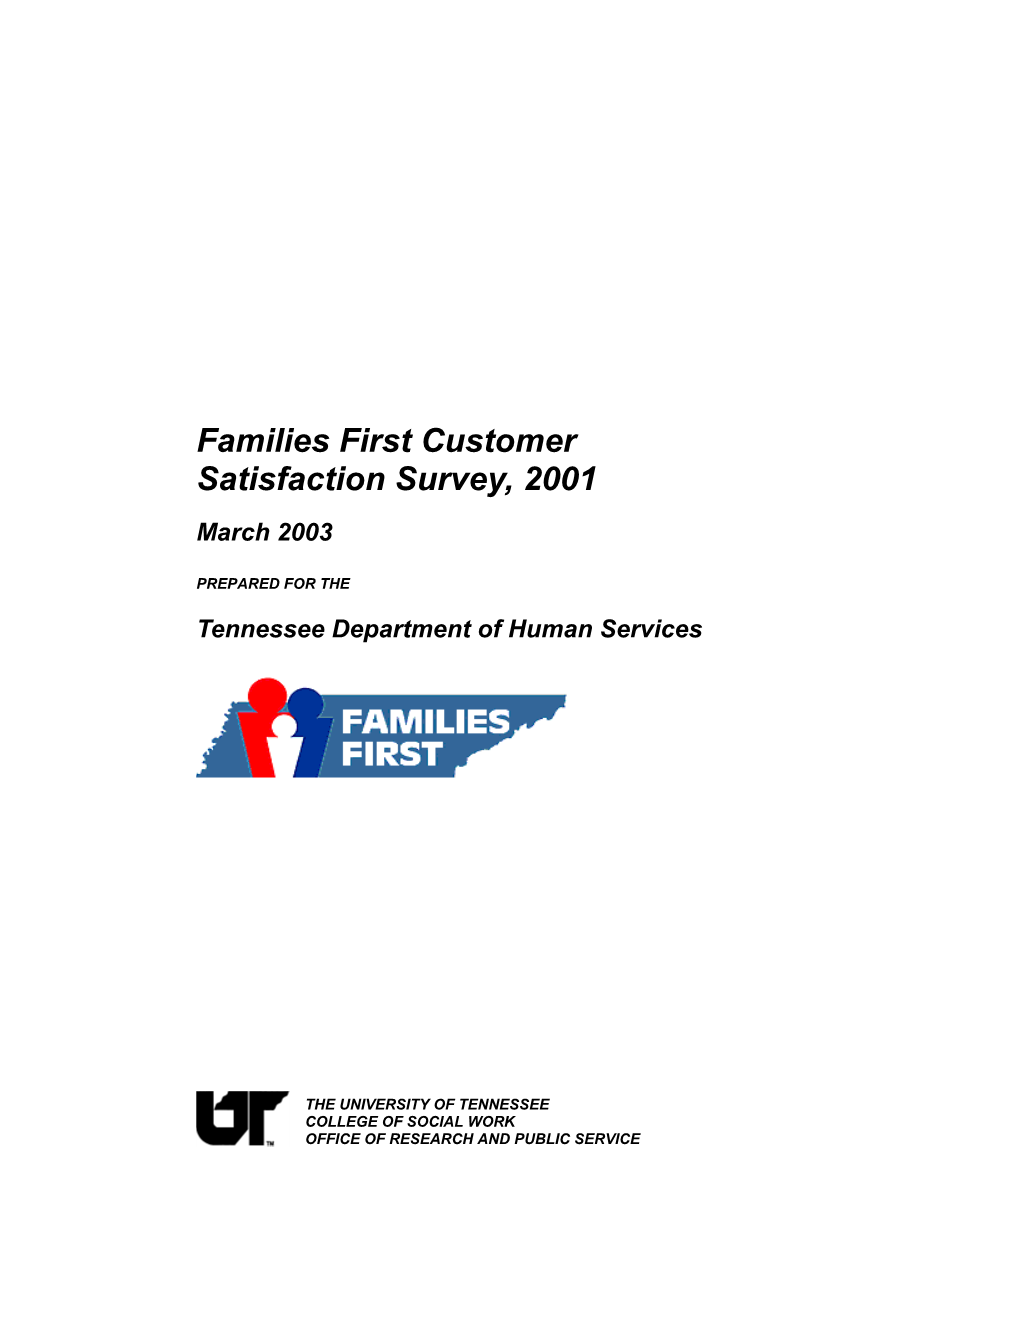 Families First Customer Satisfaction Survey, 2001 March 2003